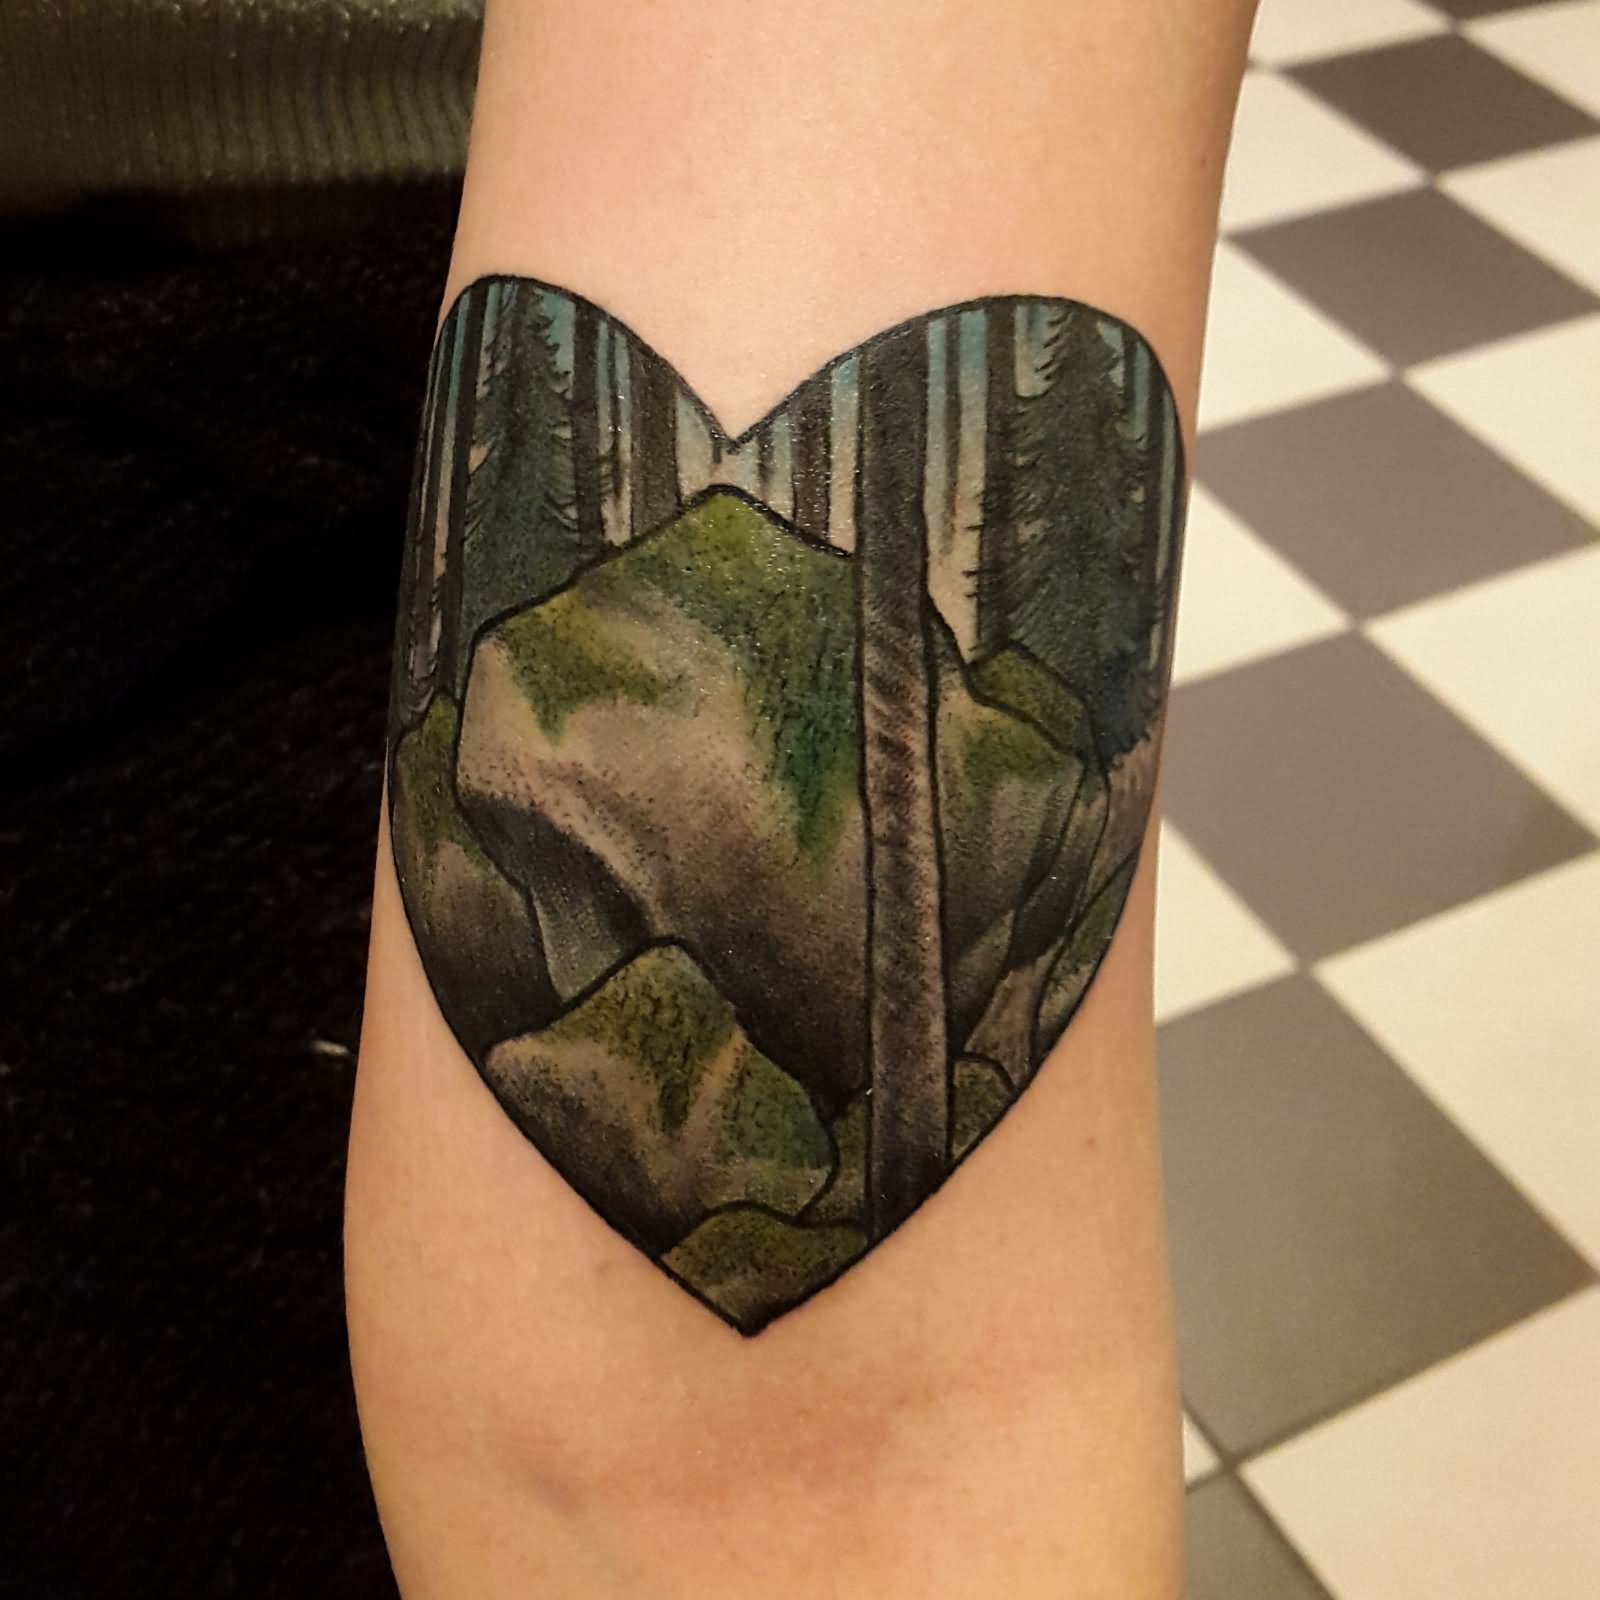 Simple Scenery In Heart Frame Tattoo Design For Half Sleeve